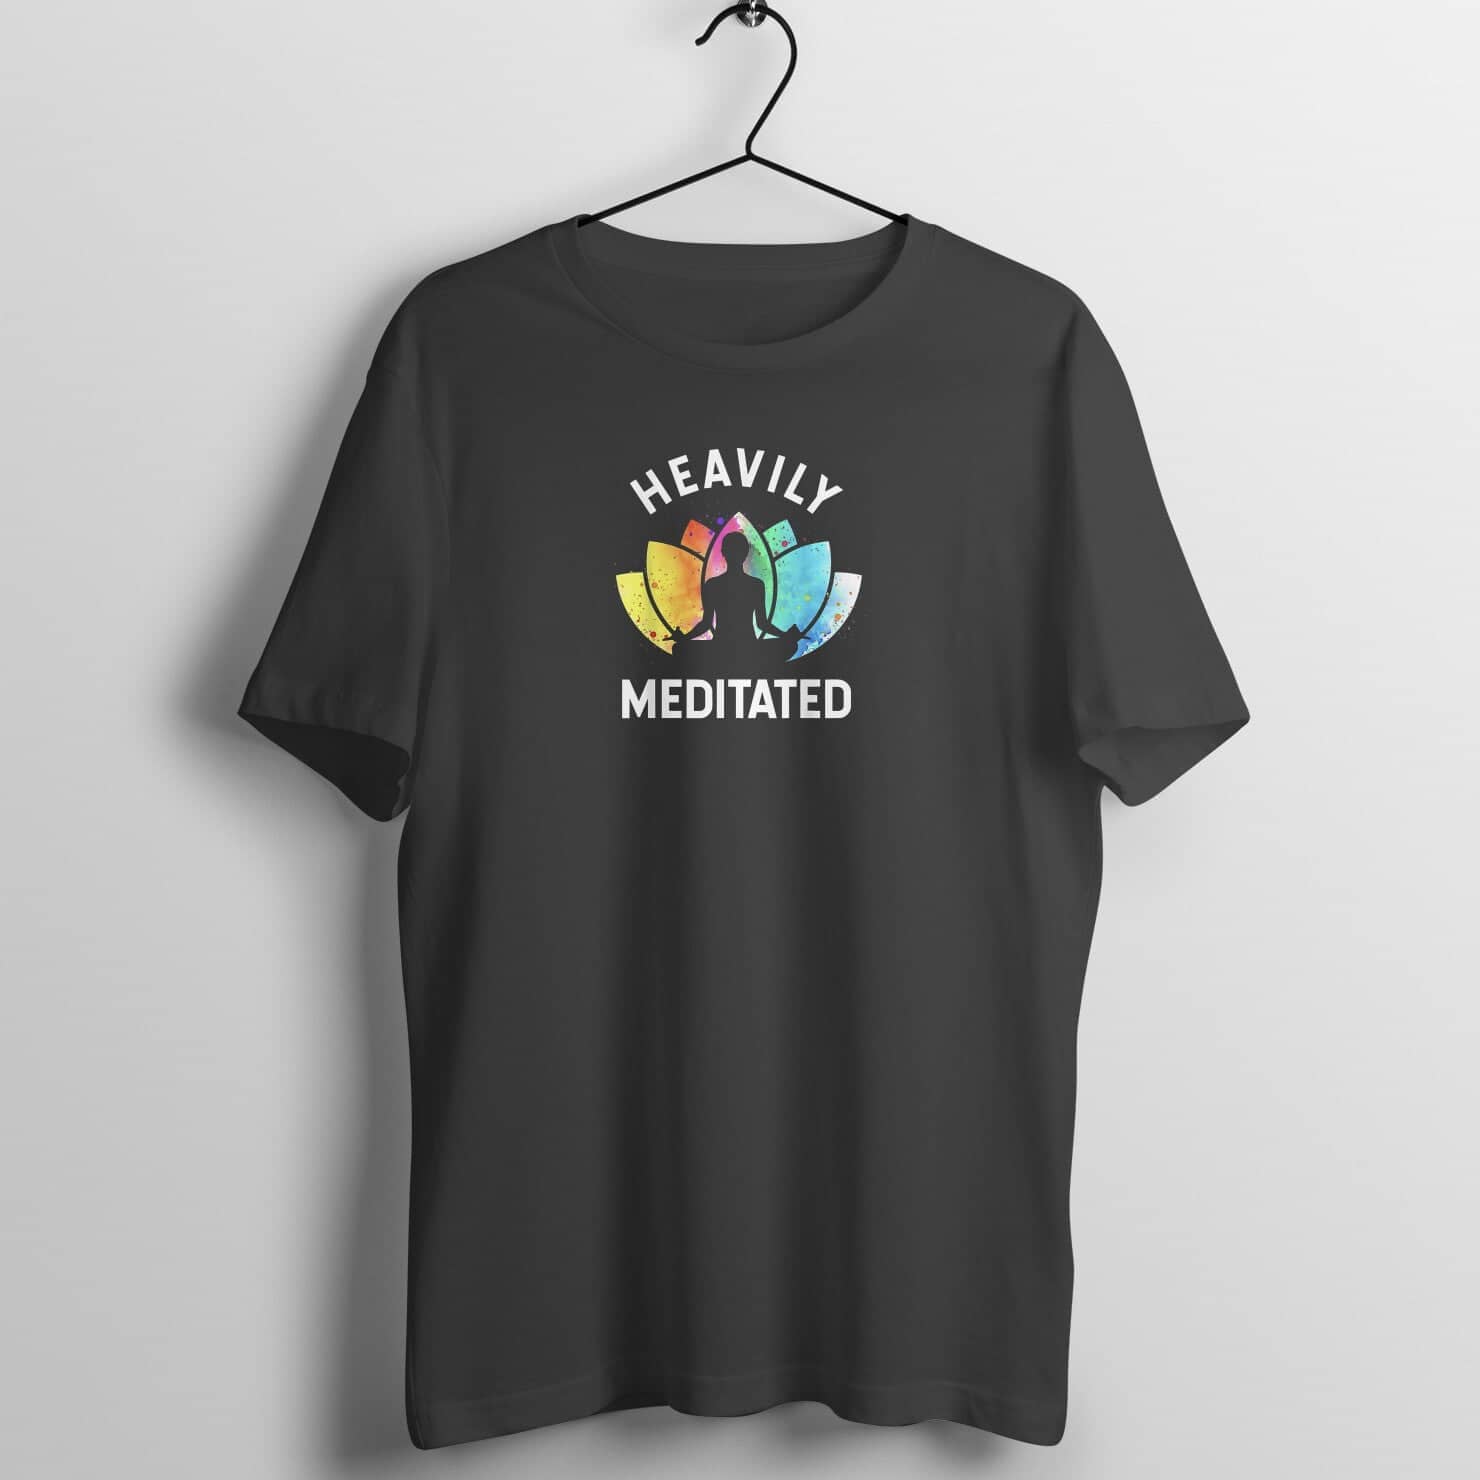 Heavily Meditated Special Spiritual Yoga T Shirt for Men and Women freeshipping - Catch My Drift India